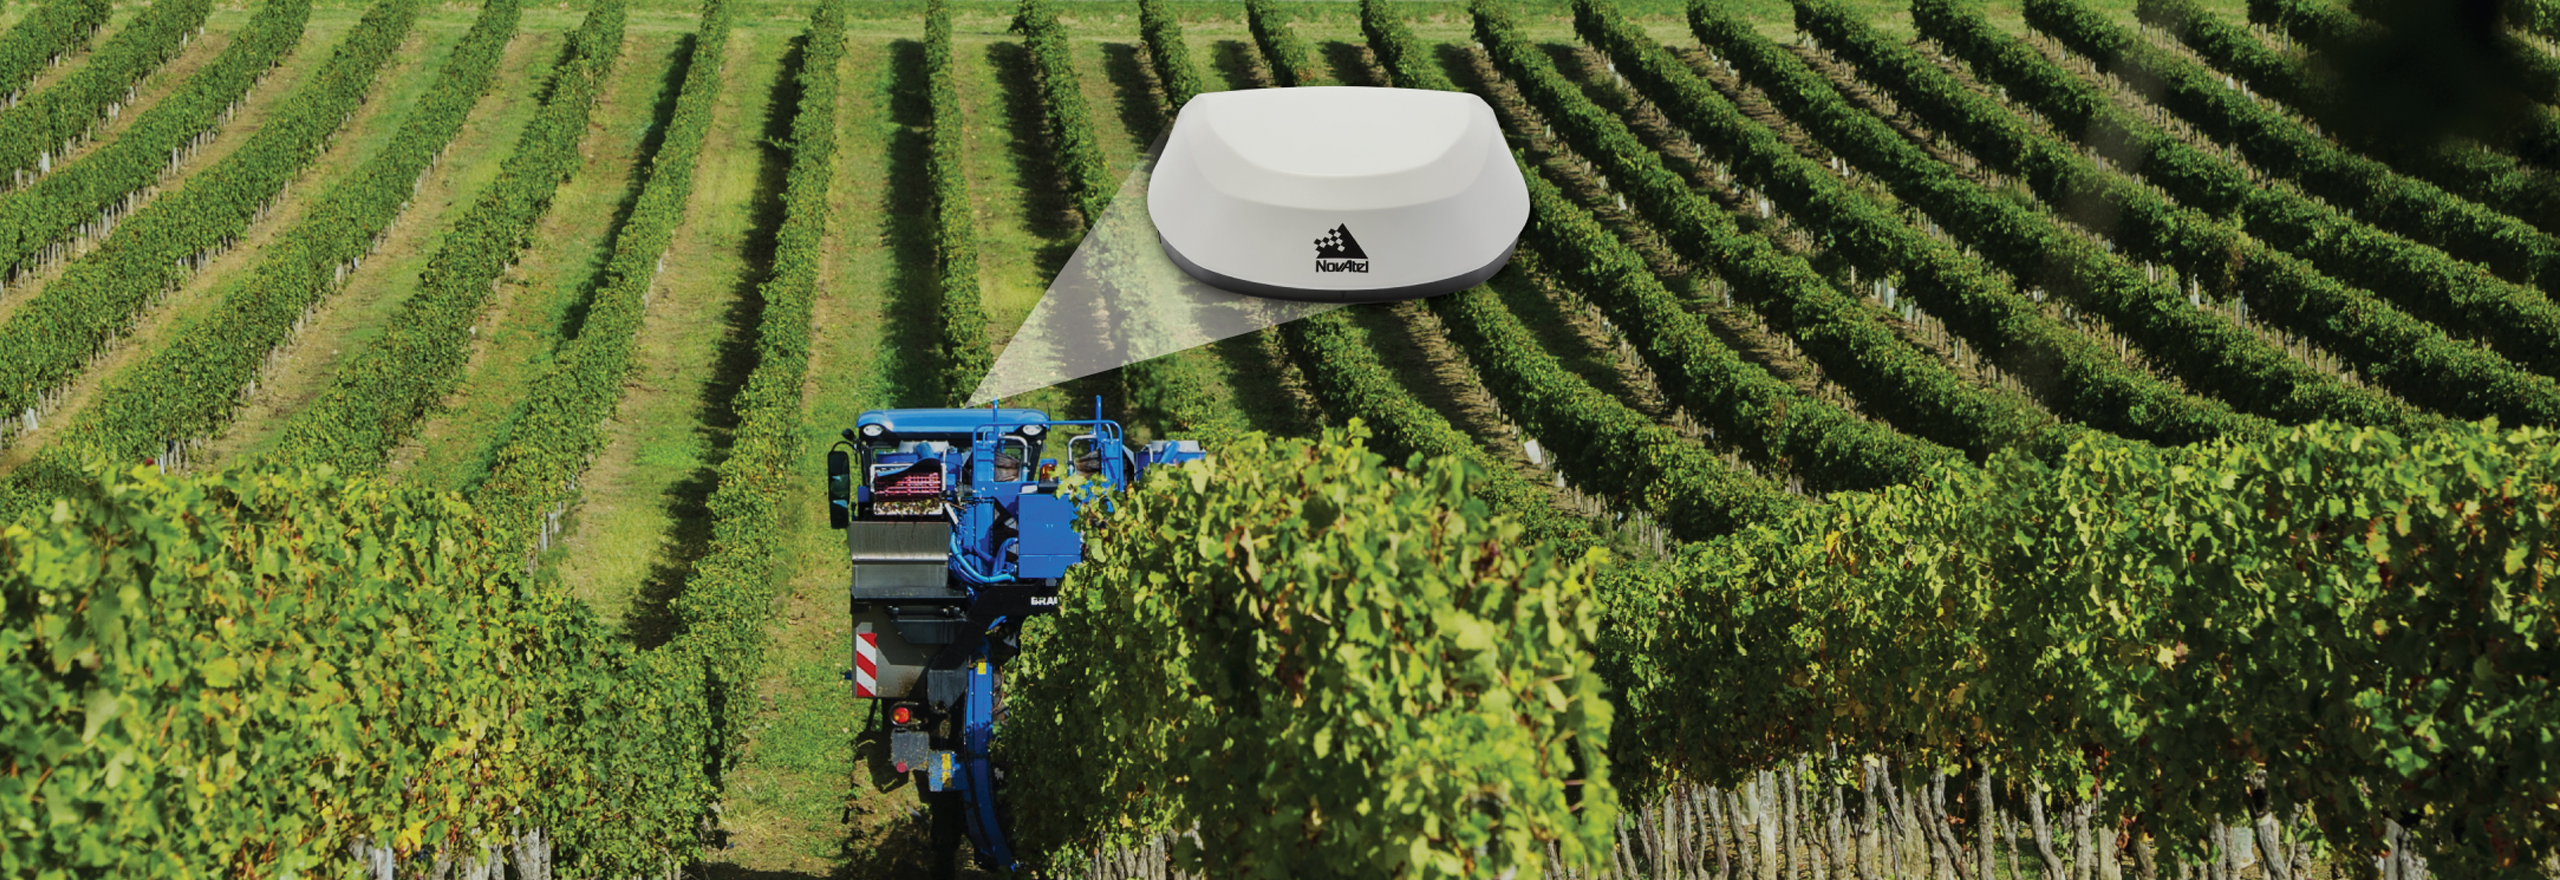 Blue vineyard equipment attending to rows of crops with a white NovAtel SMART7 Antenna shown. 